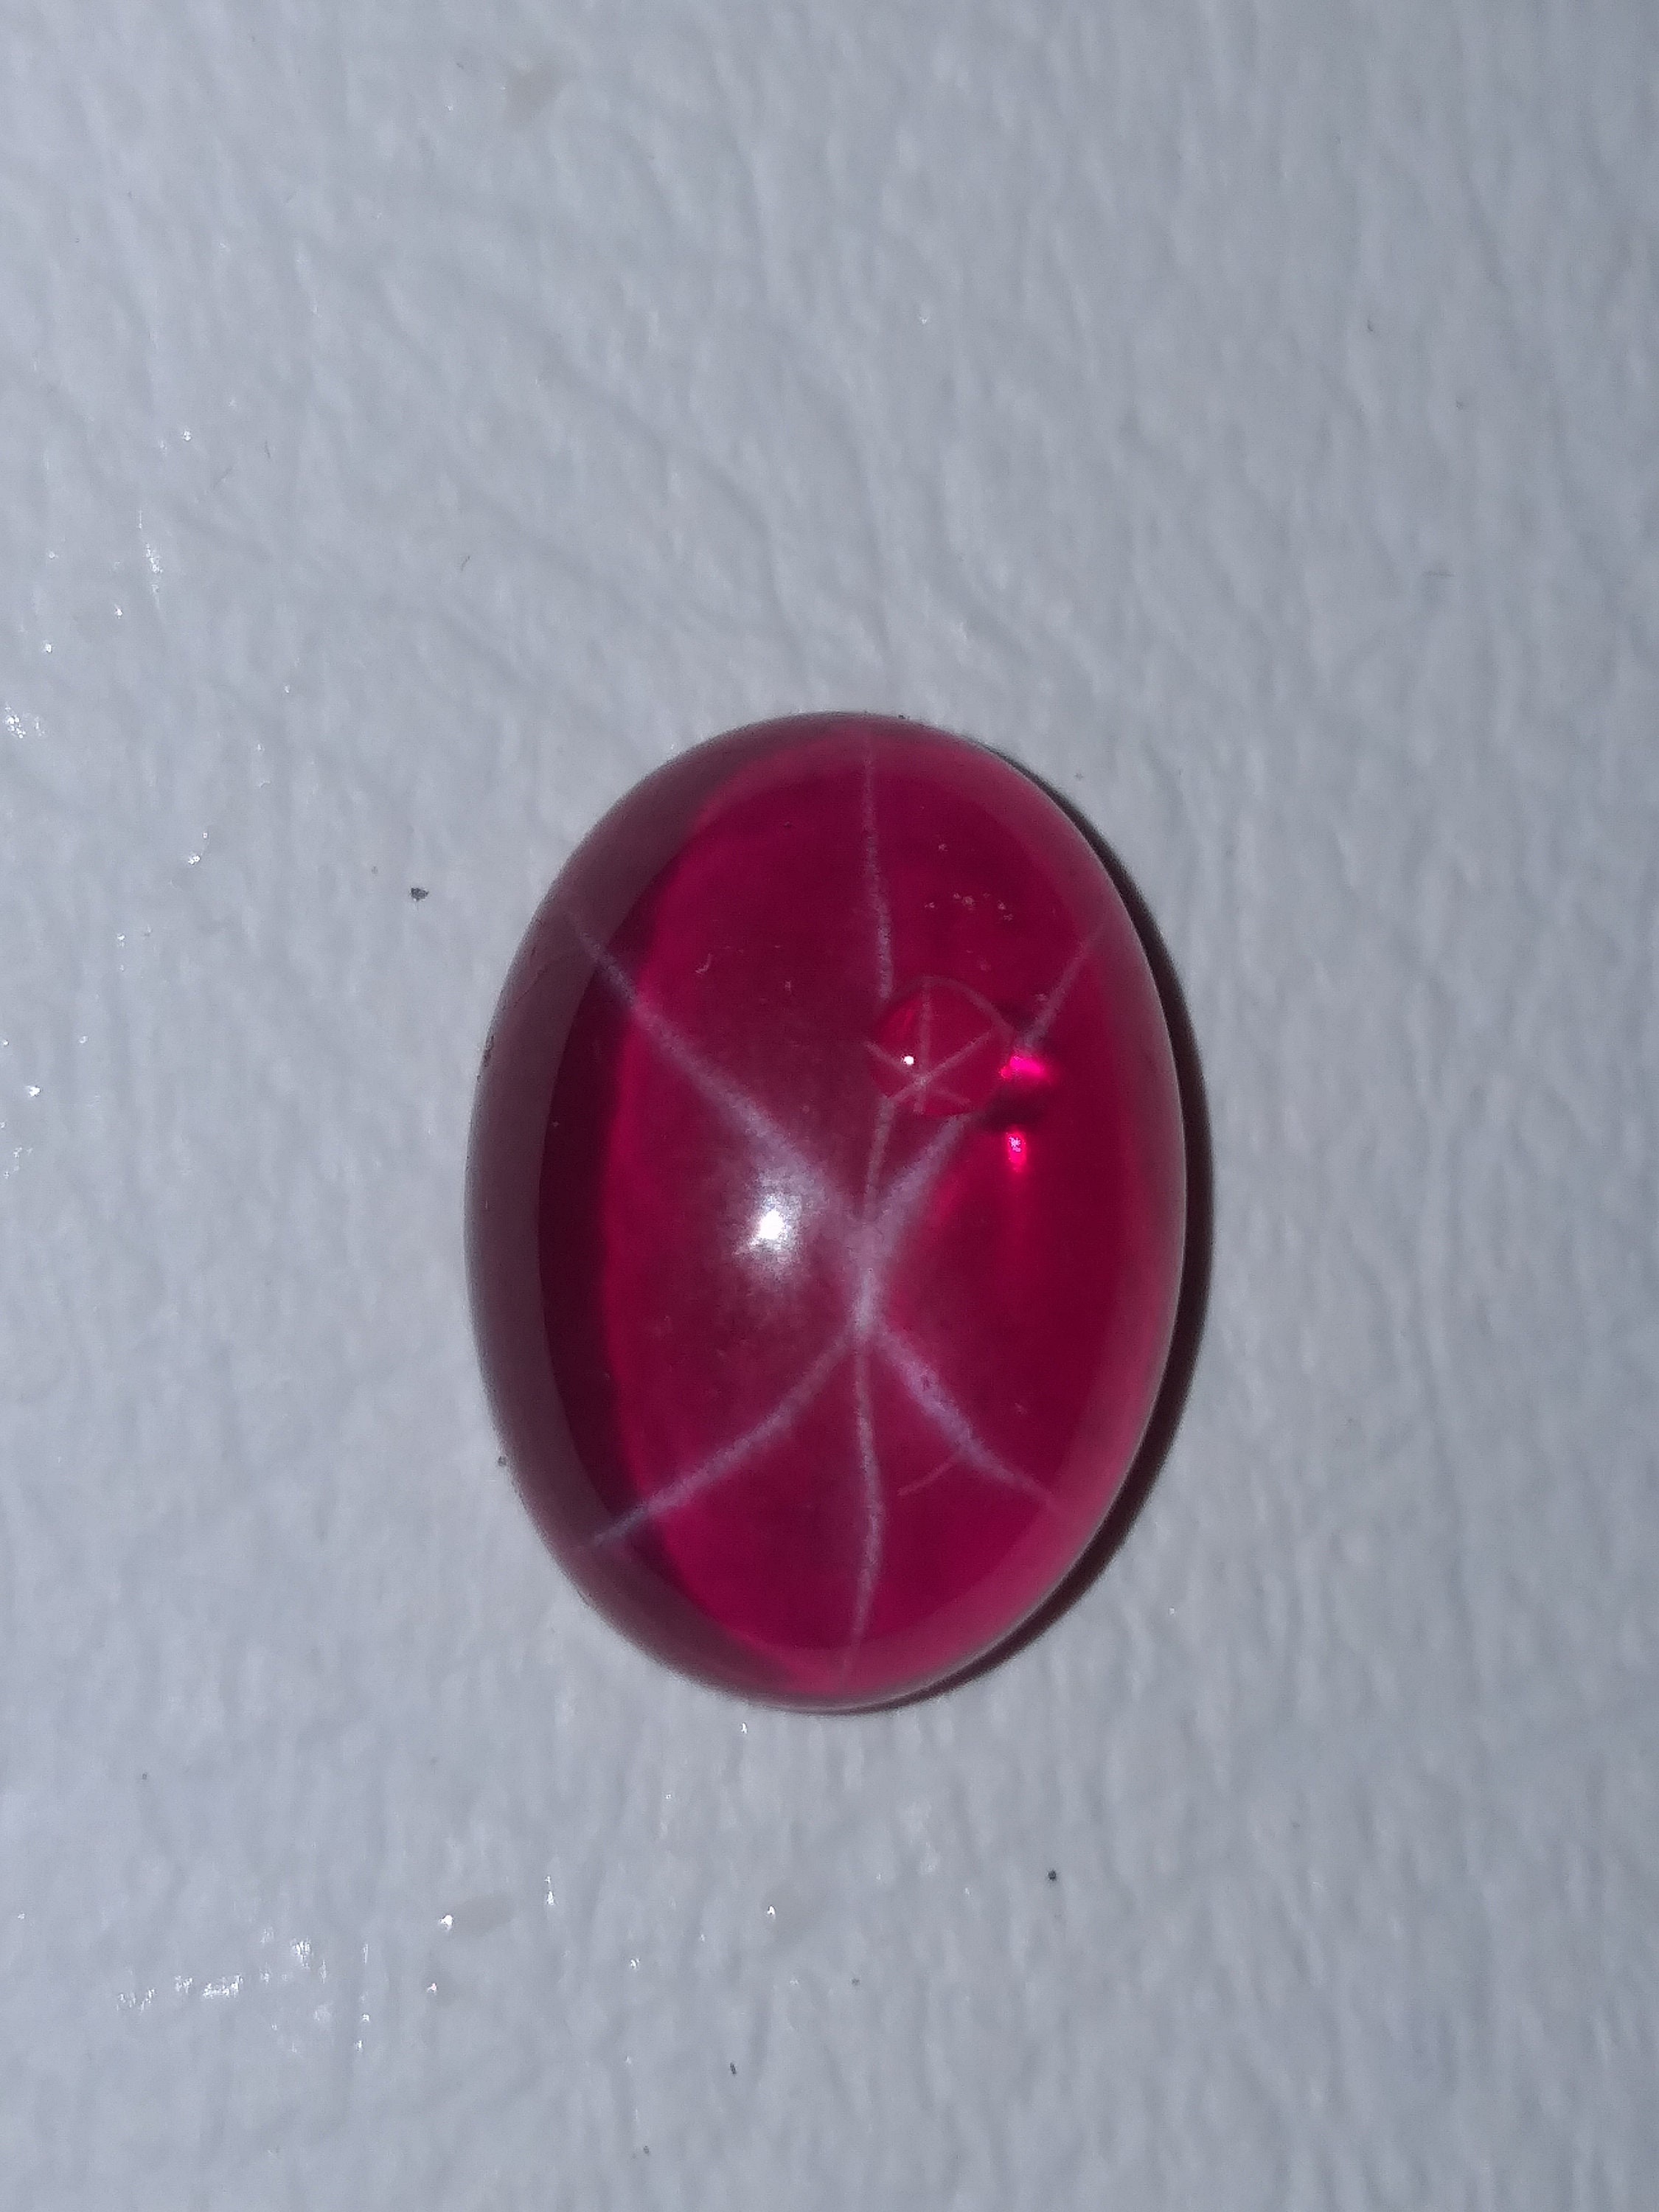 1 Piece MM Size 14x10 Linde Star Ruby Cabochon Gemstone AAA | Etsy